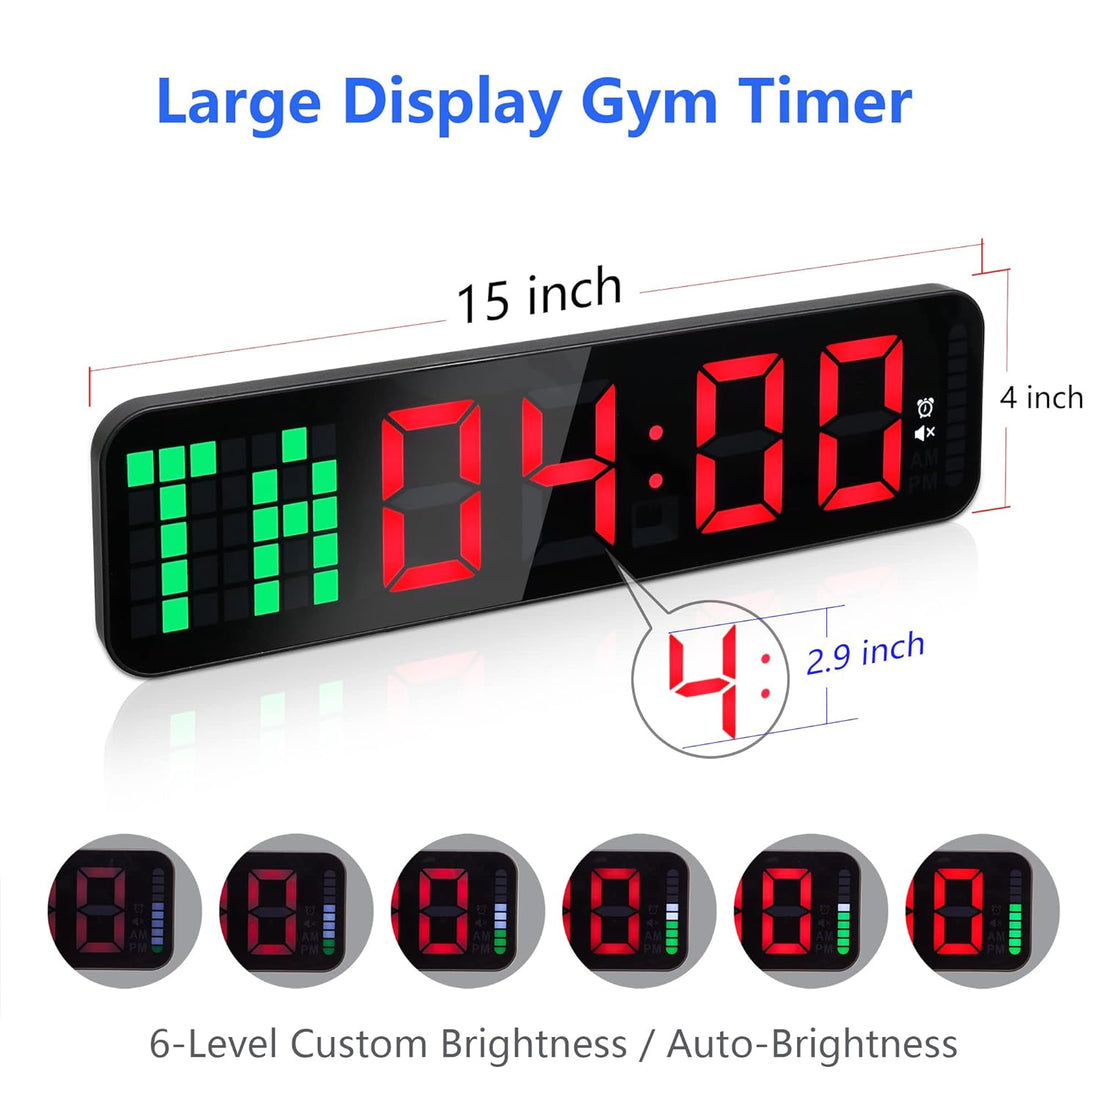 LUCORB Gym Timer, 15" Large Digital Wall Clock for Interval Workout with Time Progress Bar Countdown/Up Stopwatch, Remote Control for Home Gym Garage Boxing Crossfit Fitness